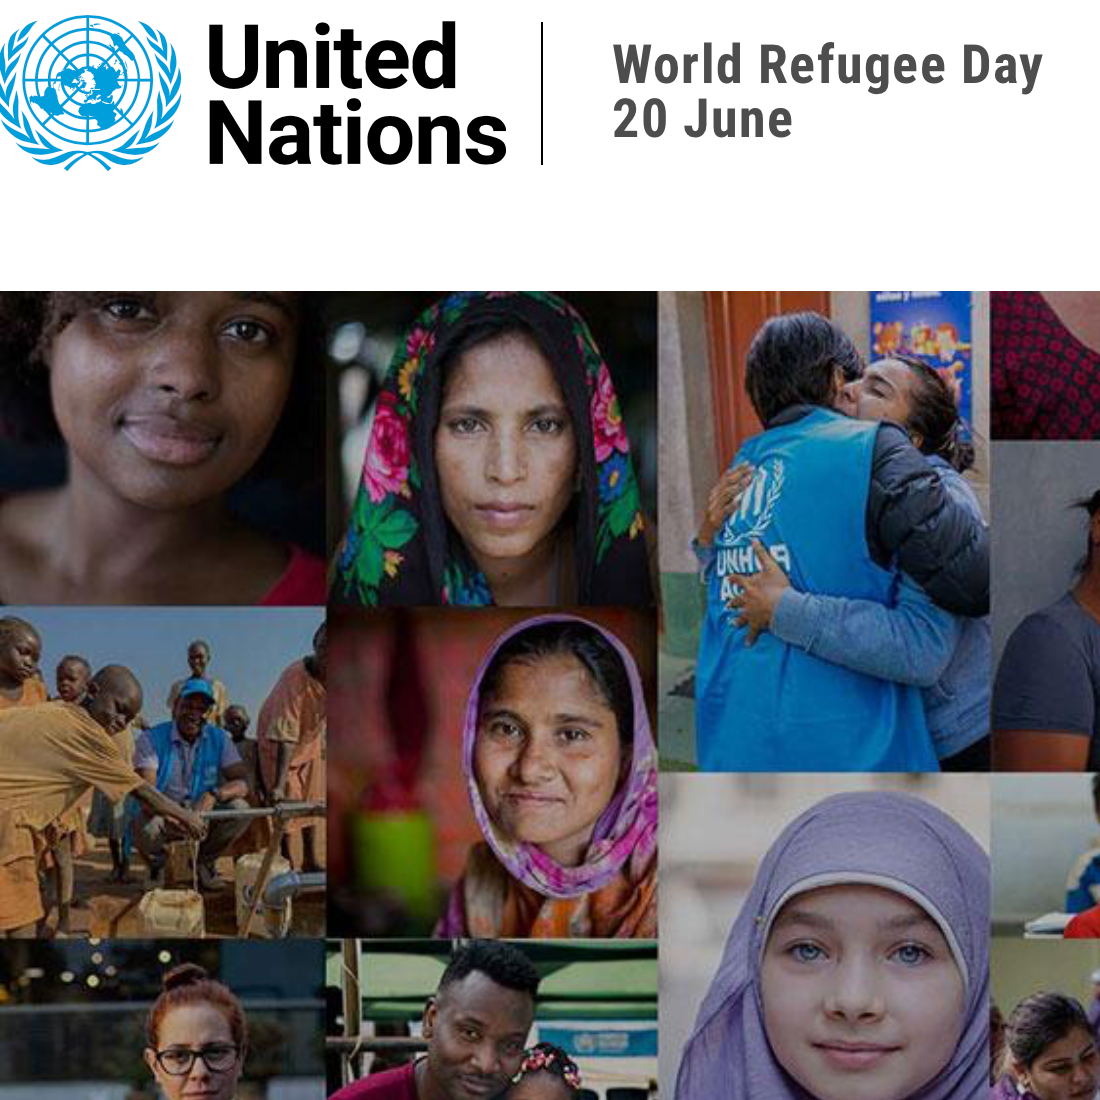 Every Refugee is a Hero - World Refugee Day 2020